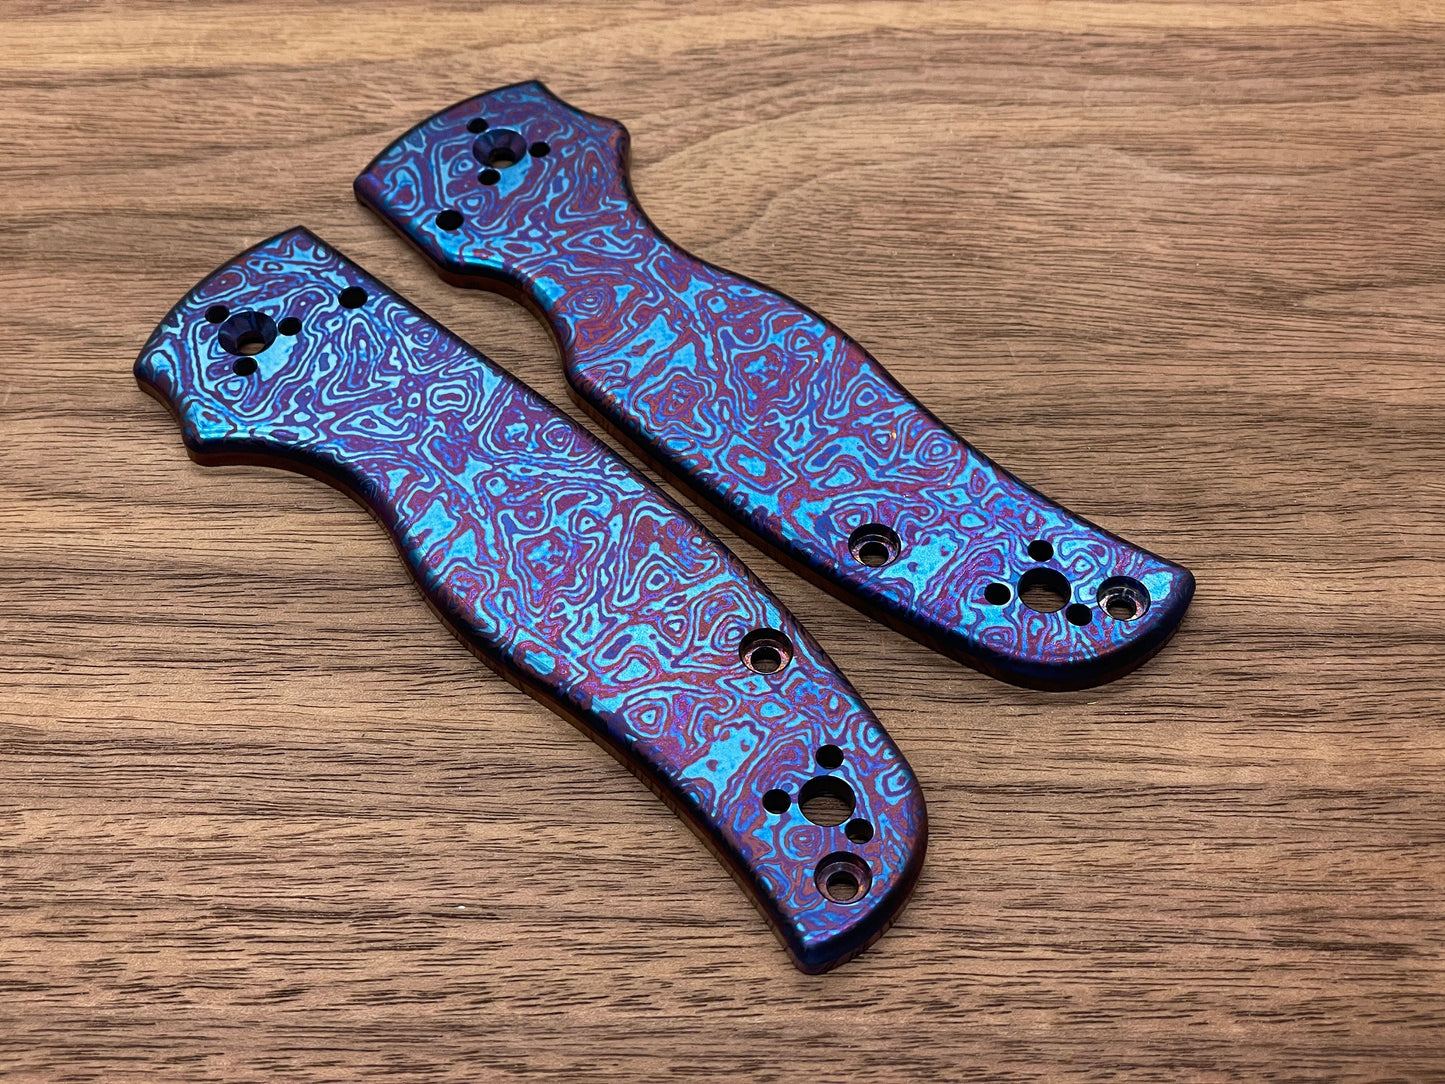 Flamed ALIEN heat ano engraved Titanium Scales for SHAMAN Spyderco